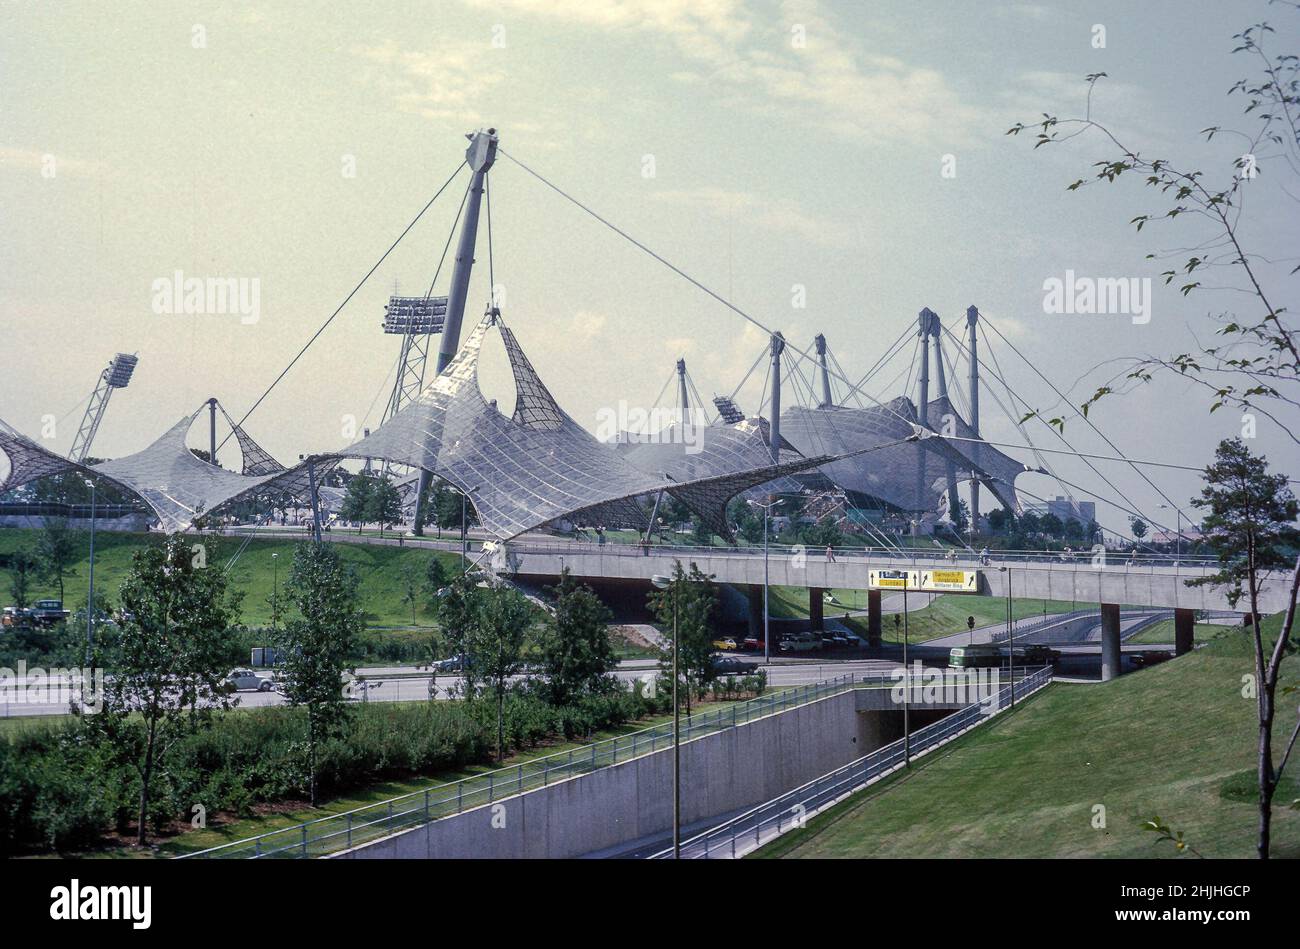 1972 Summer Olympics village at Munich, Bavaria, Germany, scene of a notorious terrorist incident  (1974 image) Stock Photo